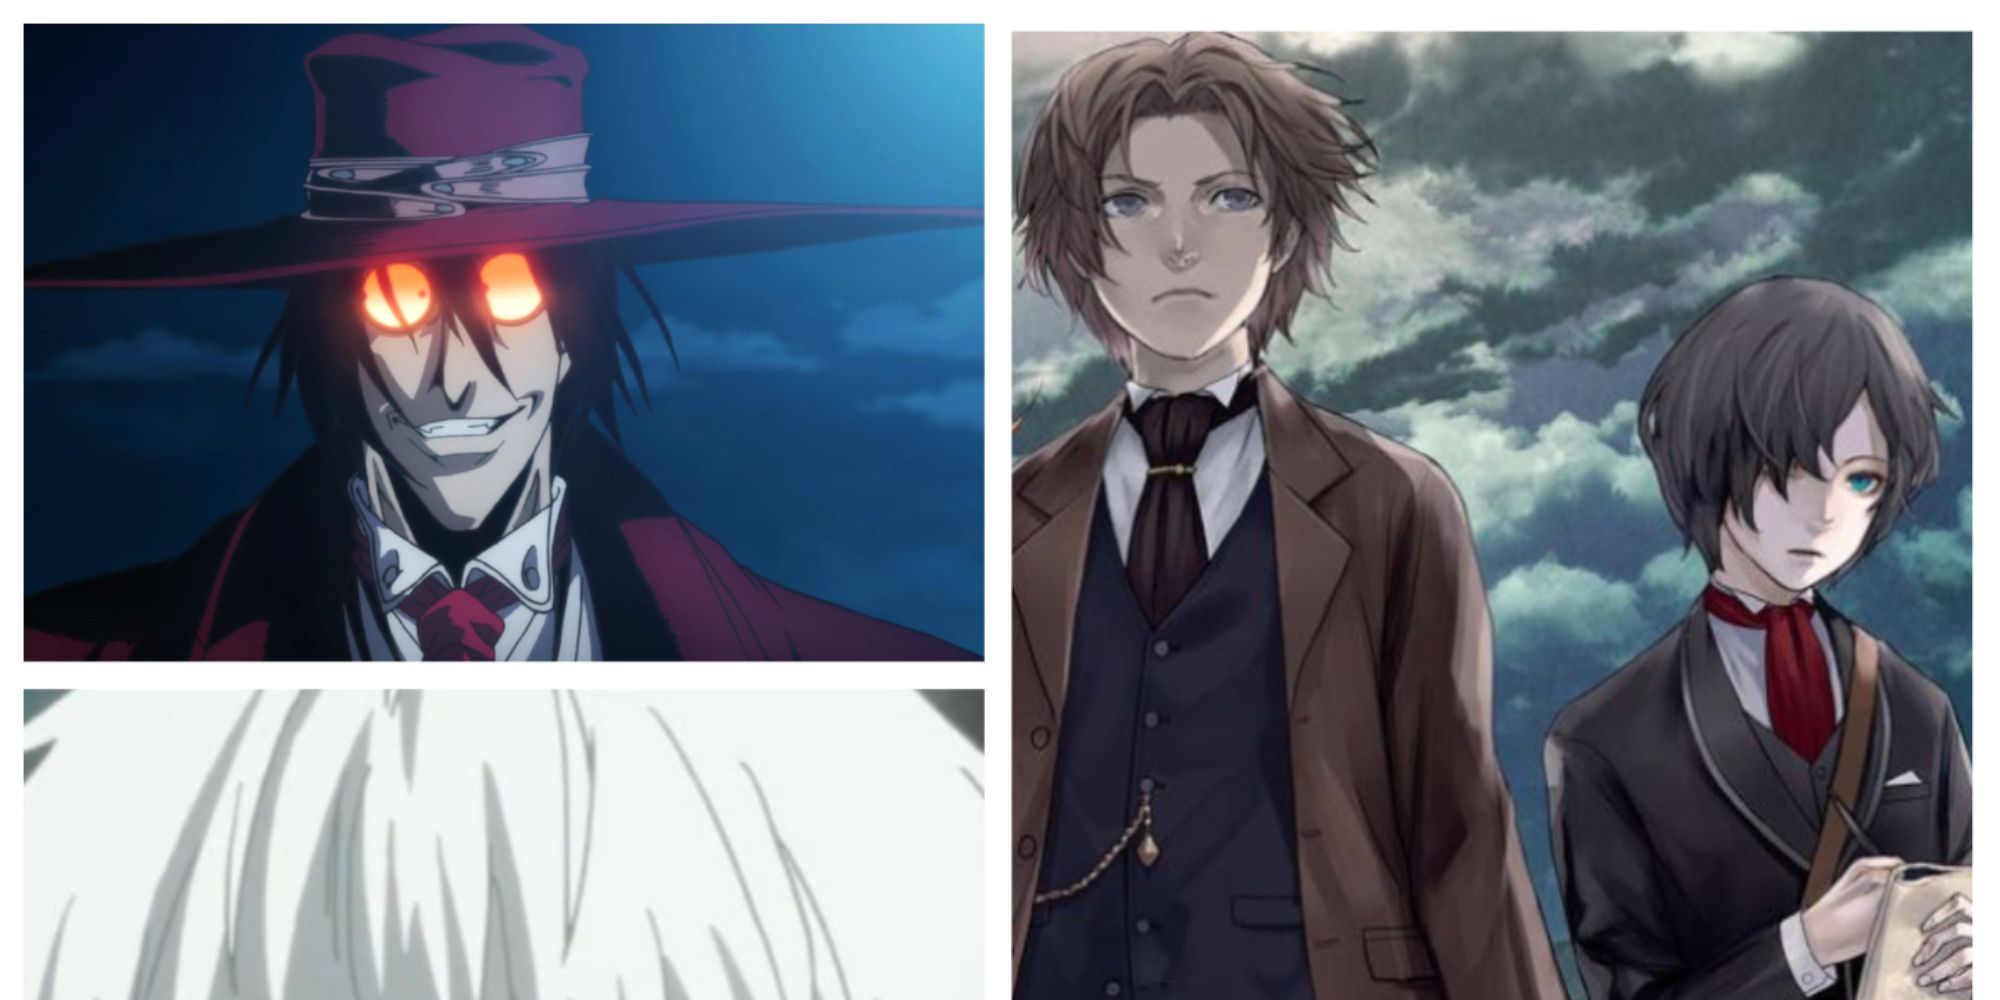 John H. Watson and Friday from The Empire Of Corpses standing together, and Alucard from Hellsing staring at the camera